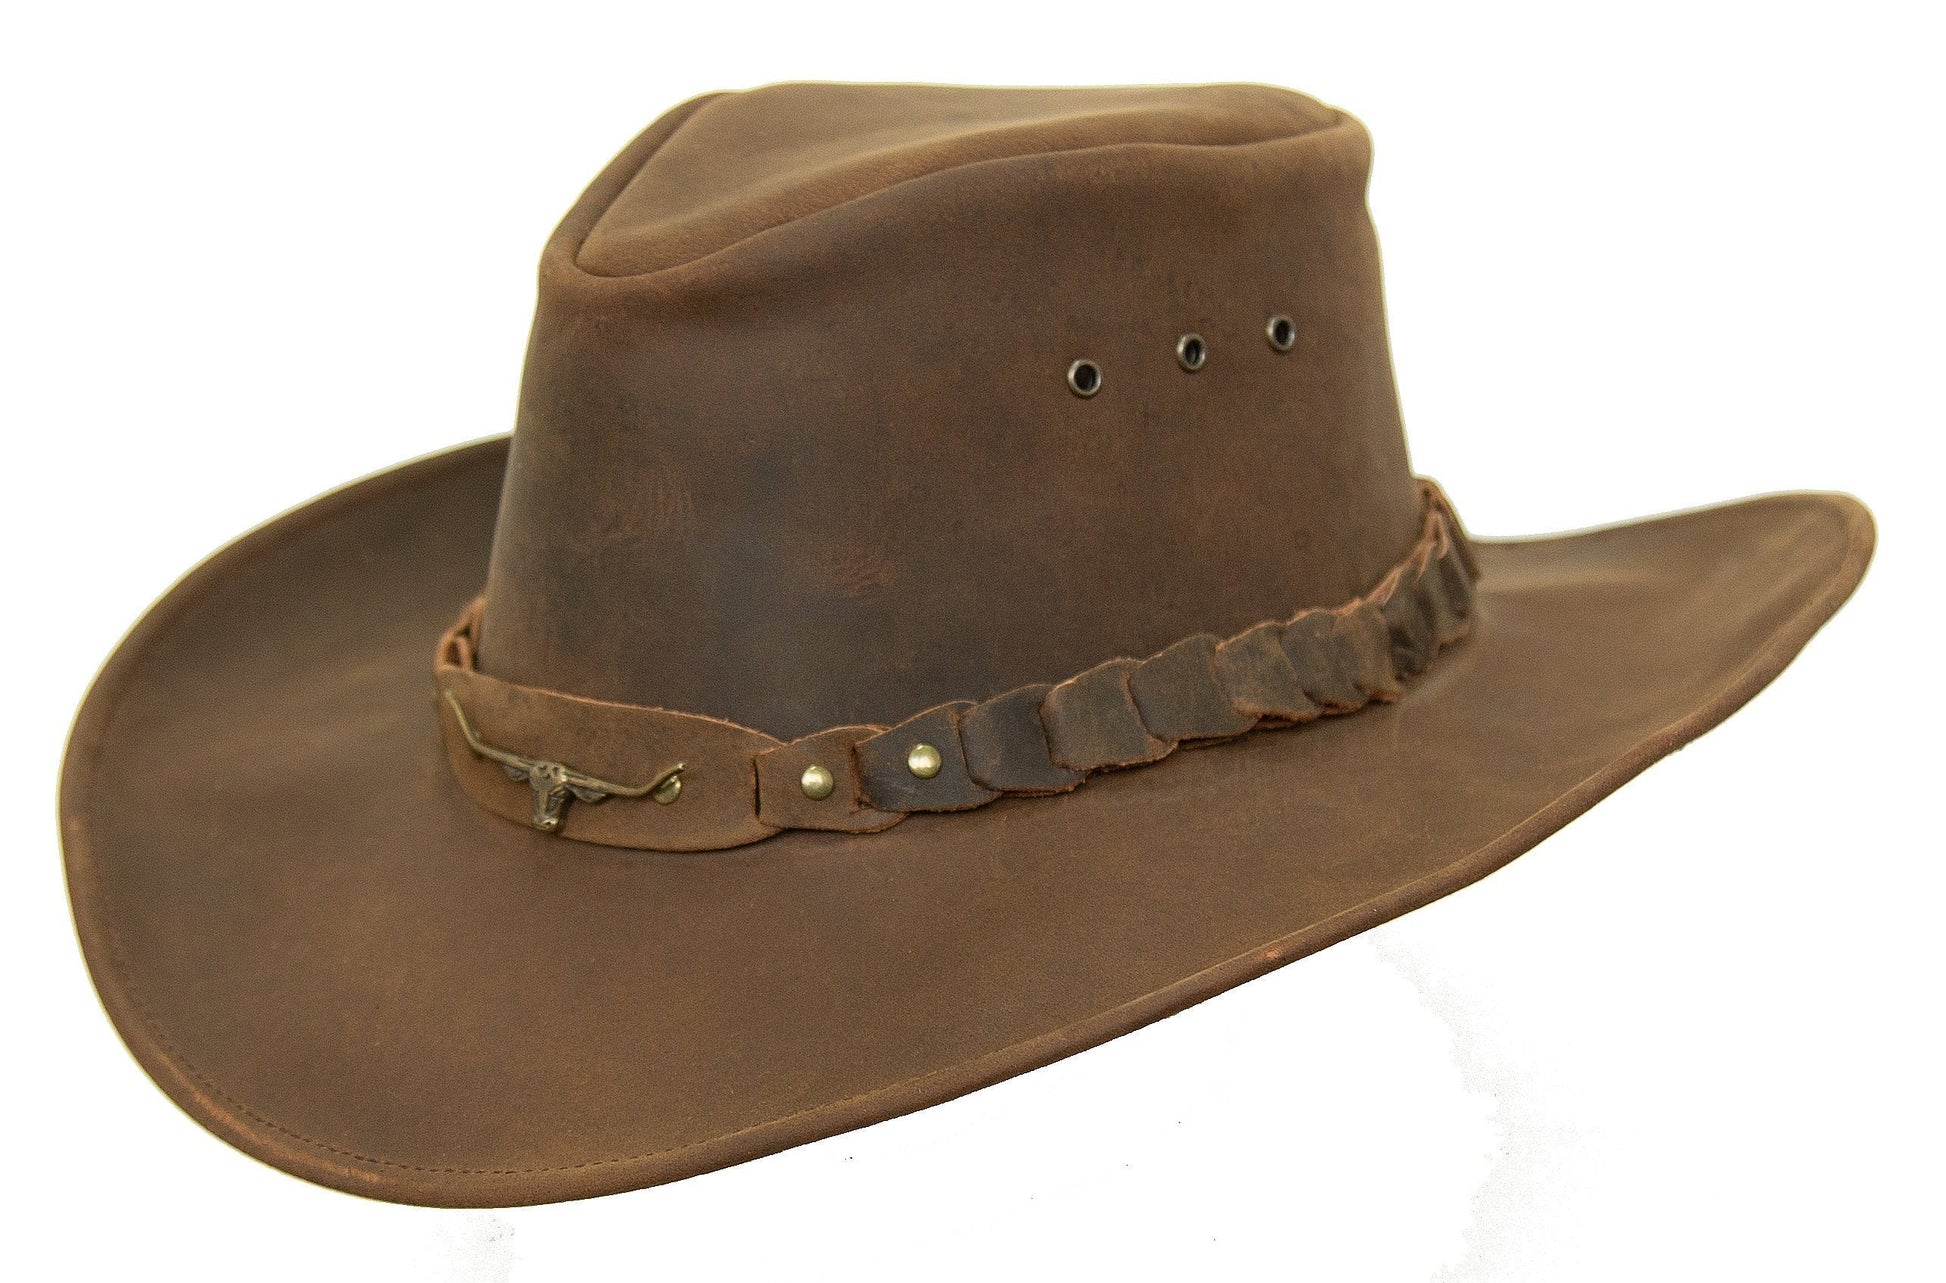 Outdoor cowboy hat made of cowhide all weatherproof with flexible